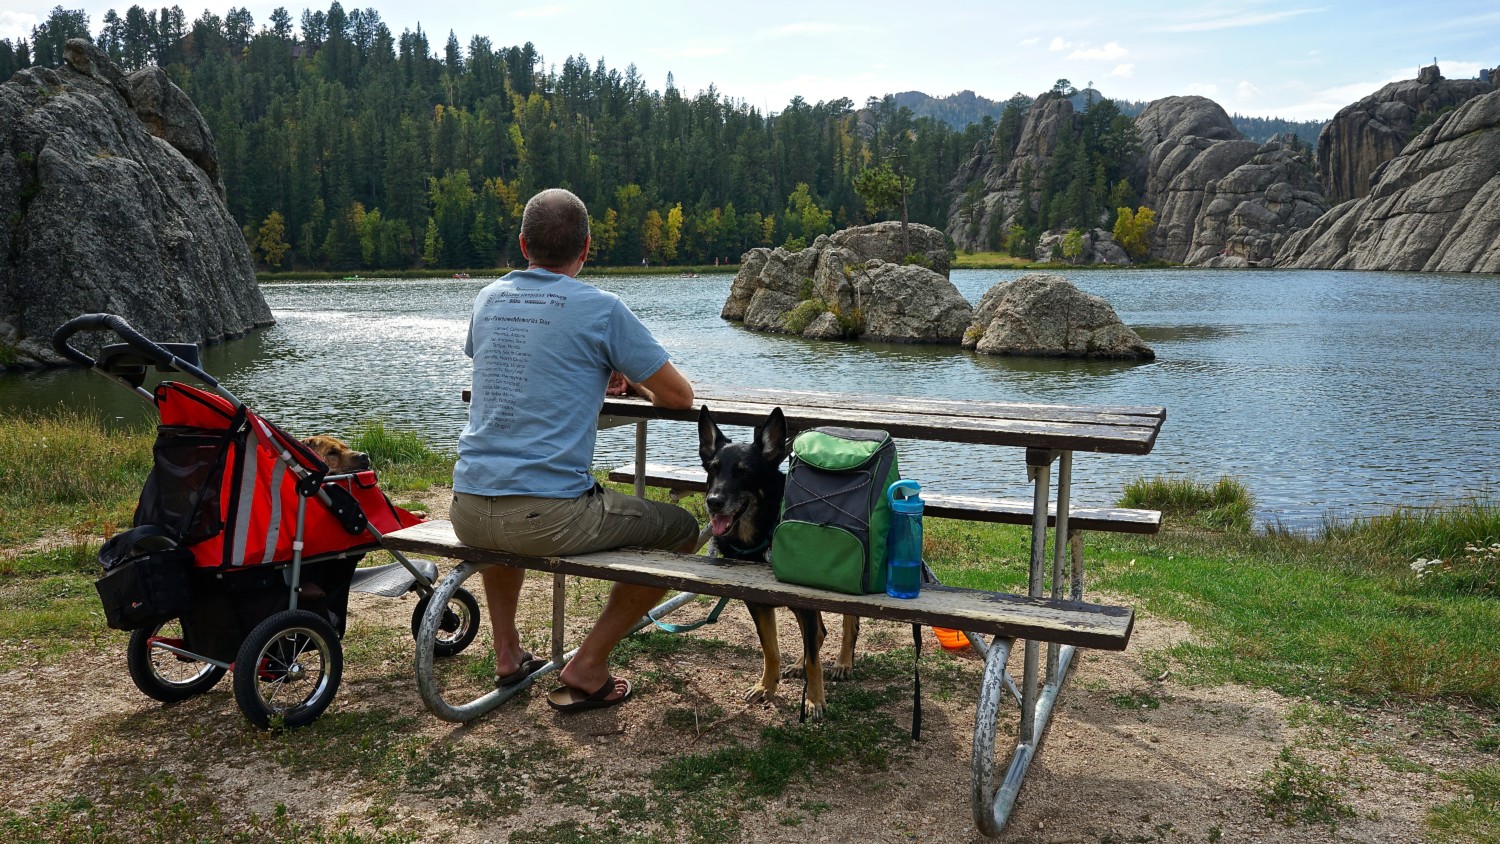 South Dakota's Top Pet Friendly Attraction: Custer State Park | GoPetFriendly.com